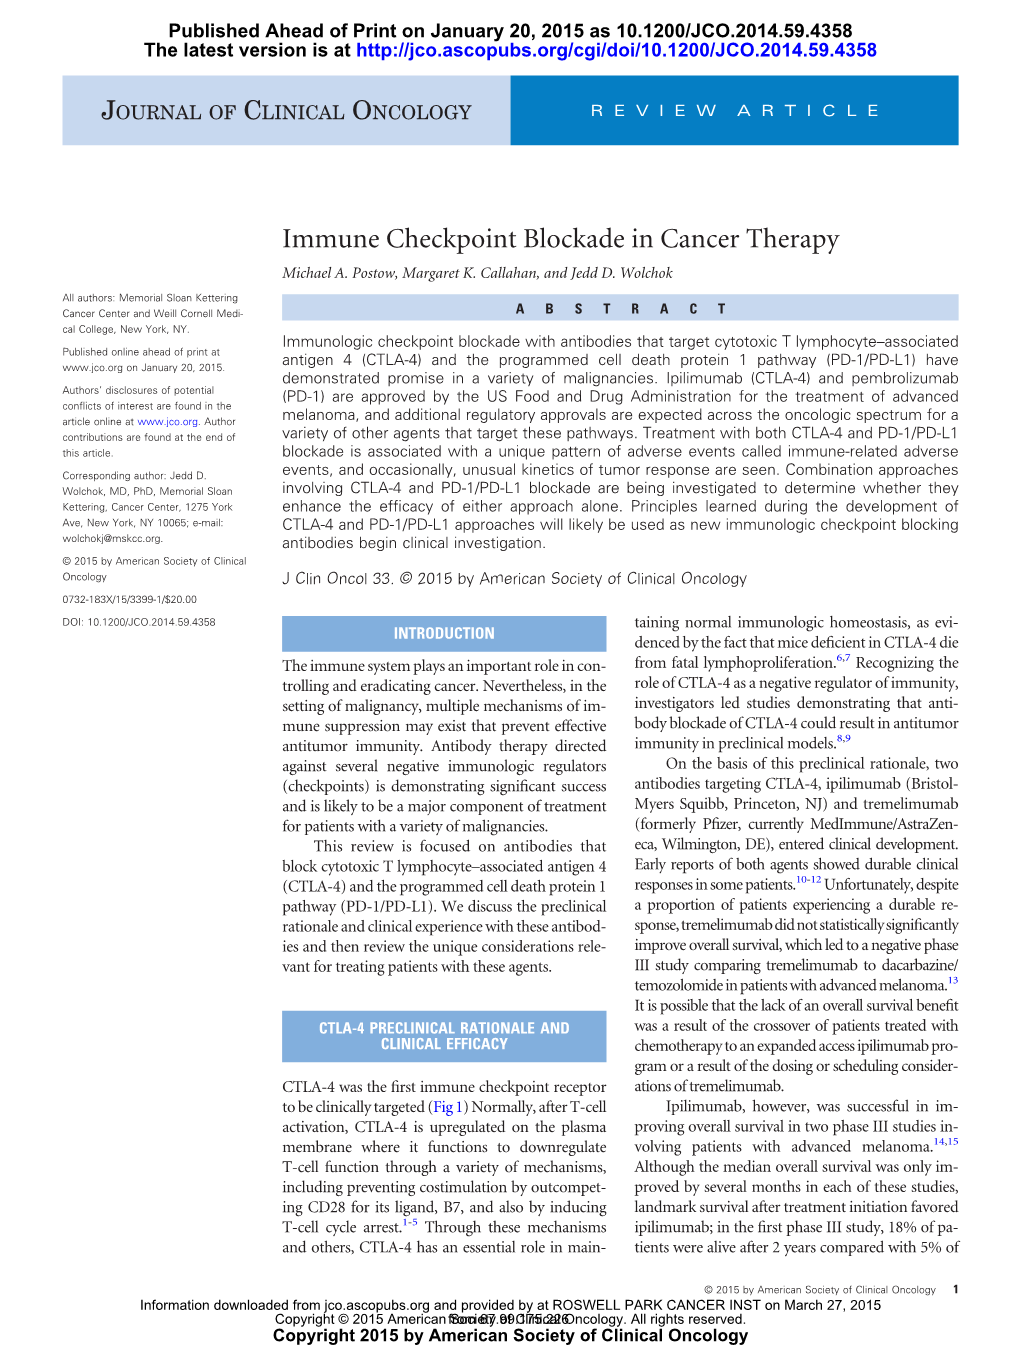 Immune Checkpoint Blockade in Cancer Therapy Michael A